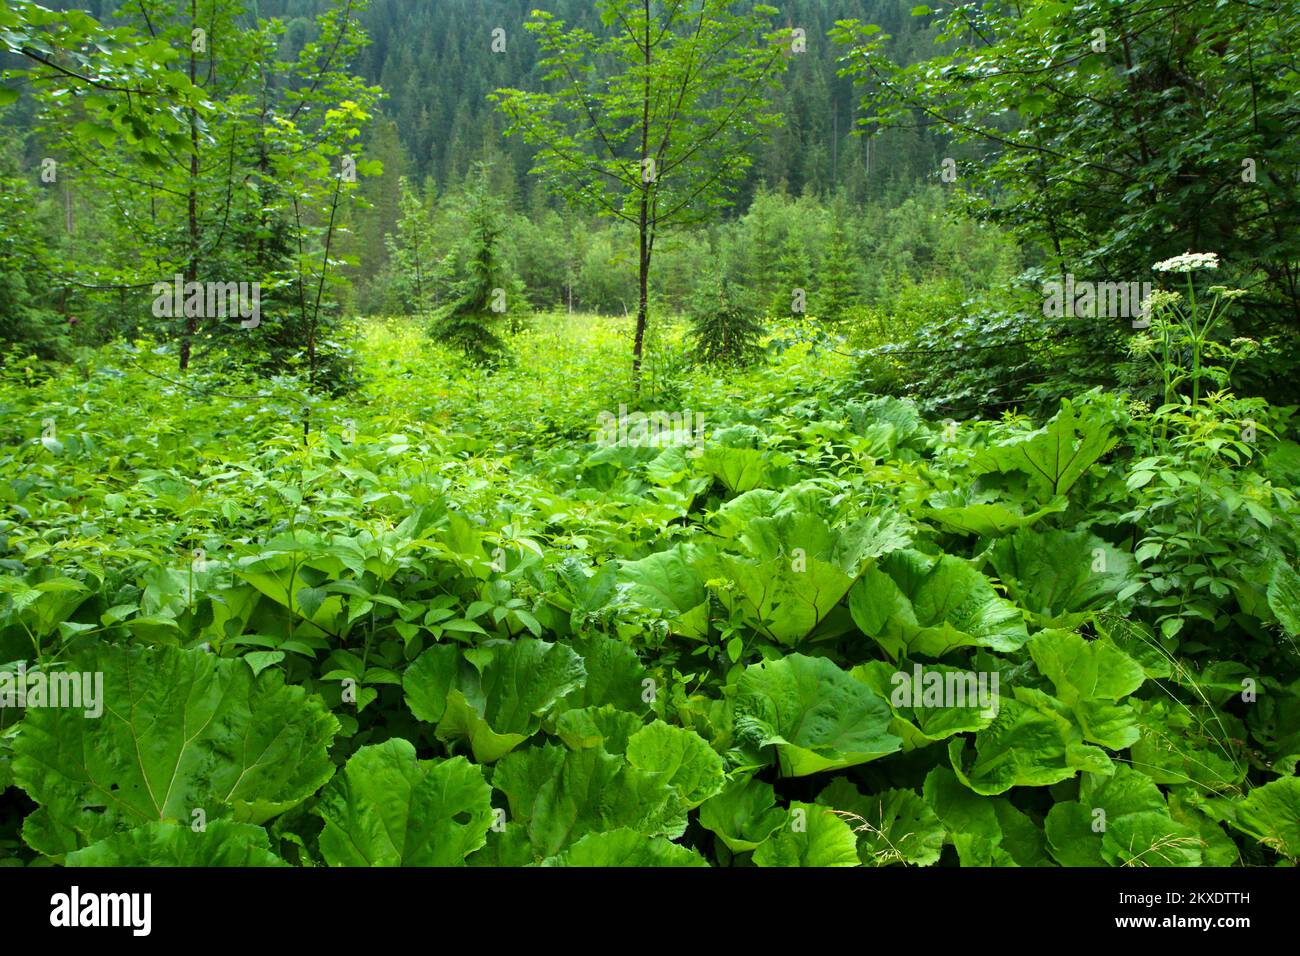 A detail of the alpine vegetation with a lot of burdocks. Everything is fresh green and wet after rain. Stock Photo